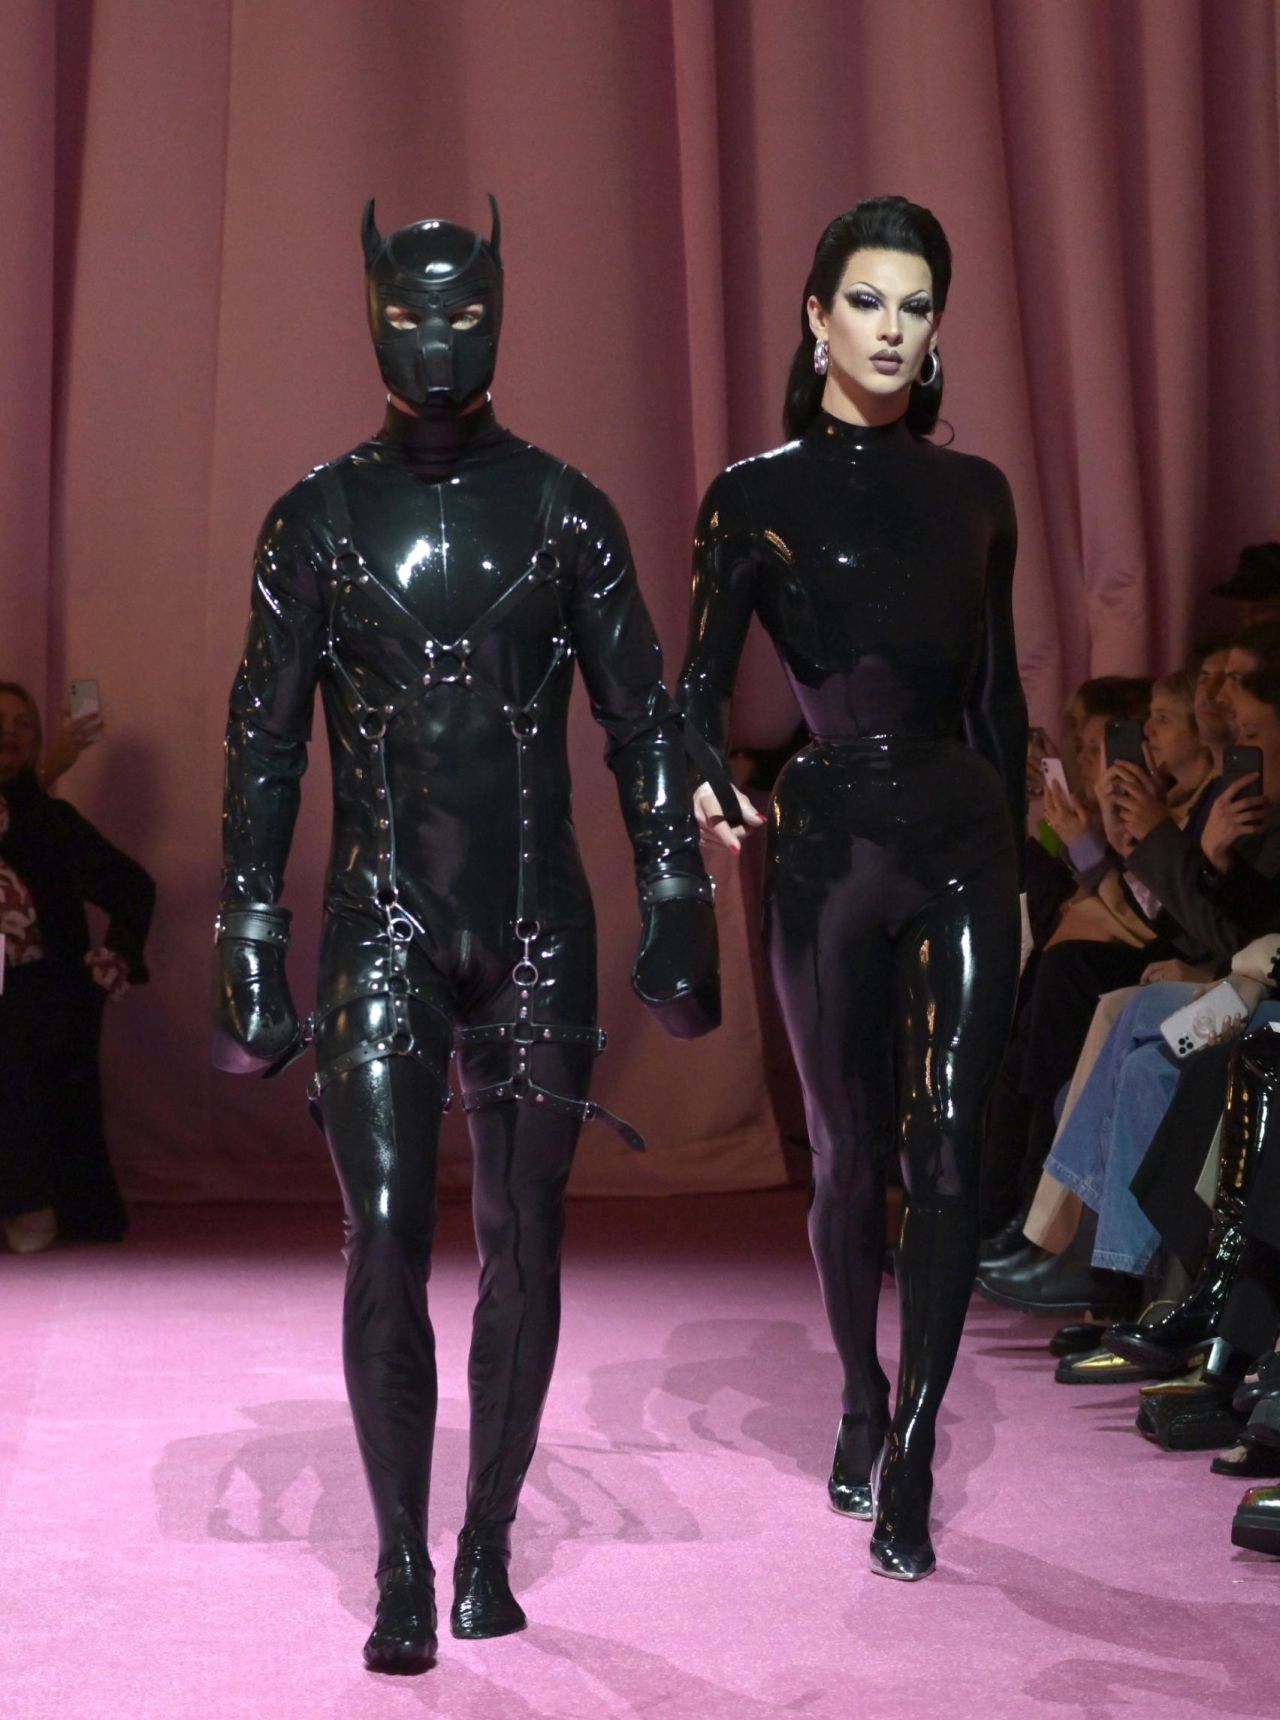 Violet Chachki (right) walks down the runway with a submissive companion in tow at the 2022 Richard Quinn show during London Fashion Week.